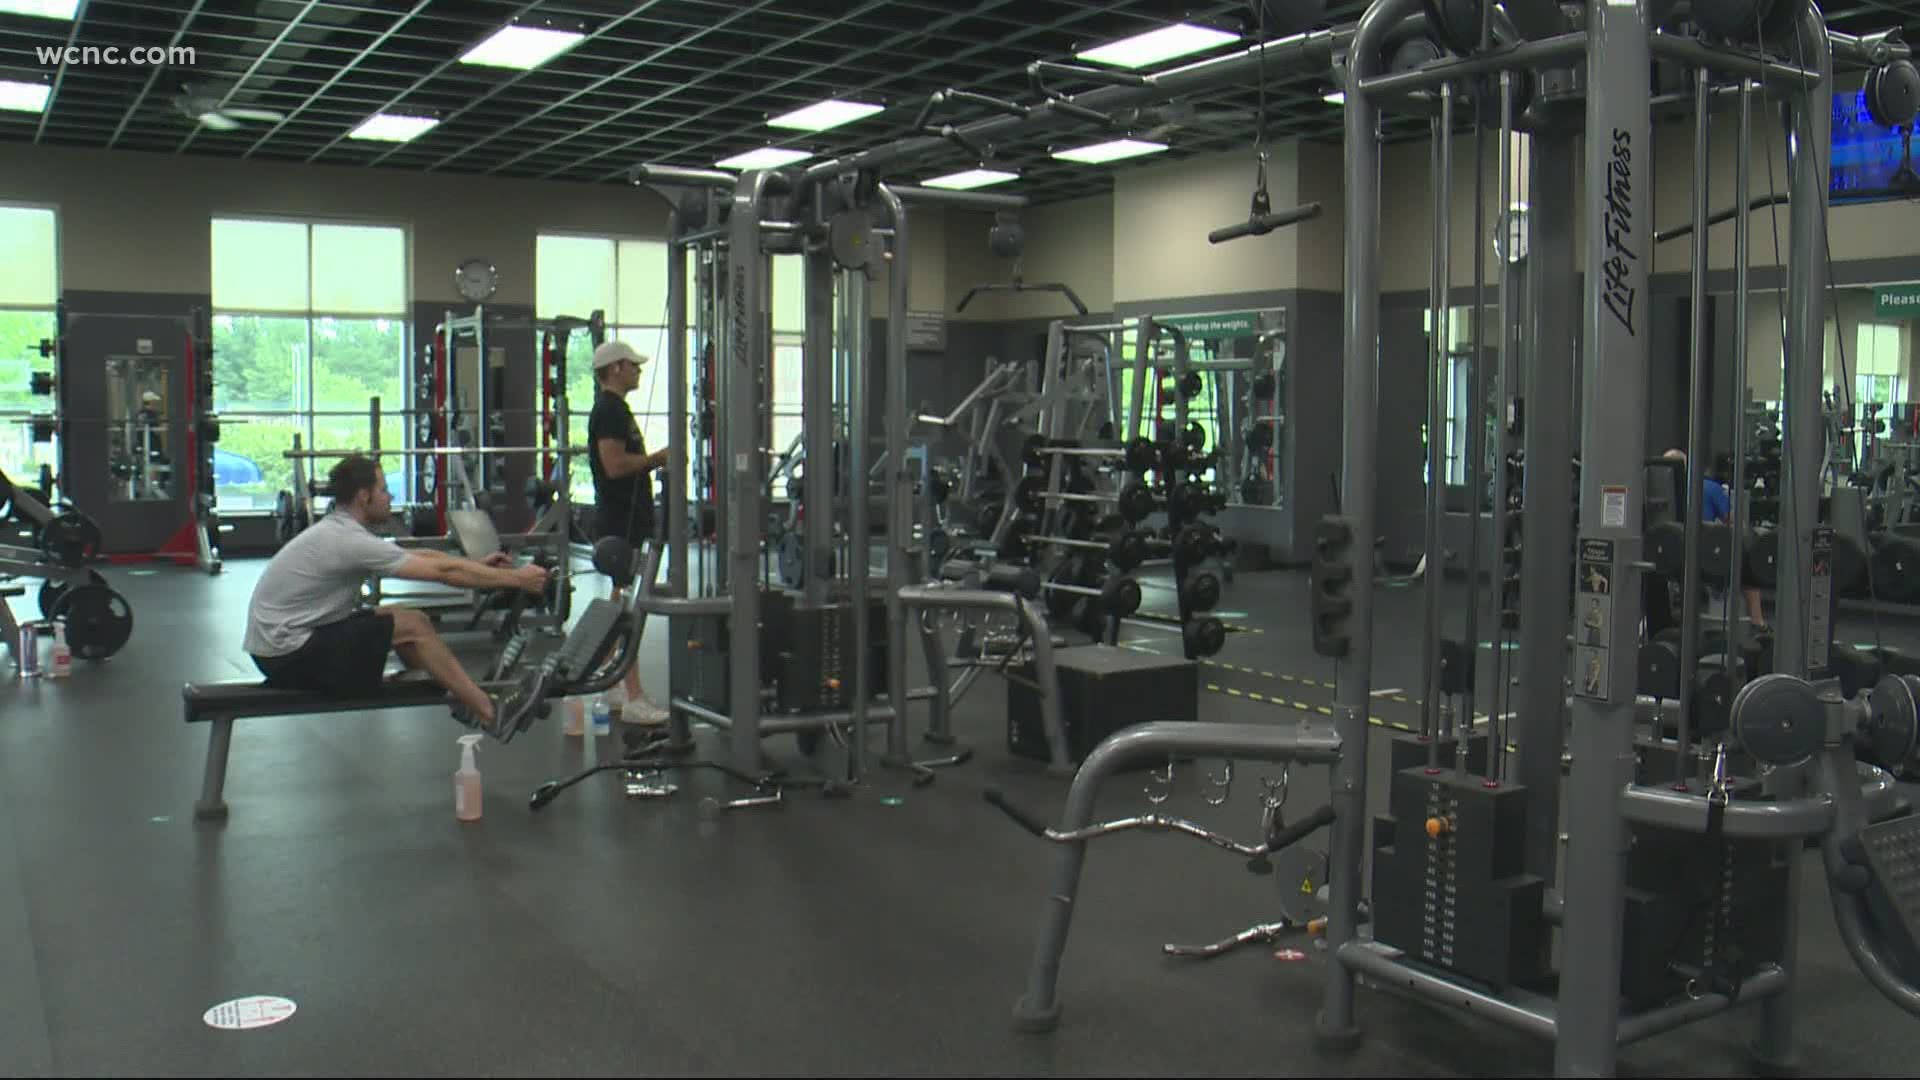 WCNC went behind the scenes to see how YMCA locations in Charlotte are keeping people safe as they reopen for the first time in around six months.